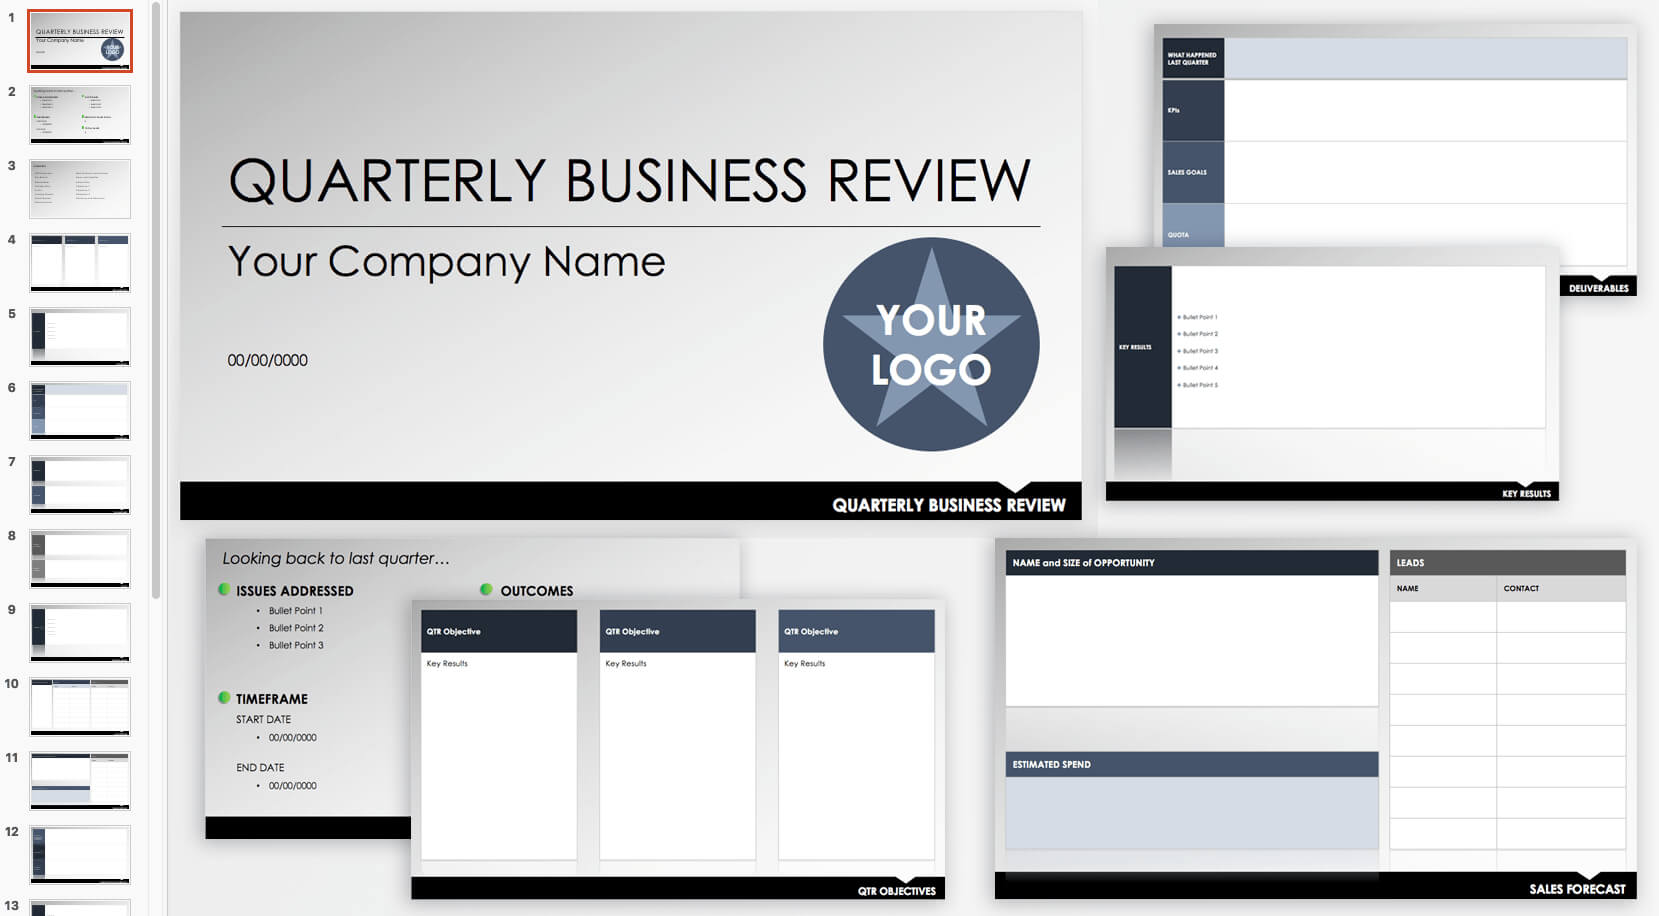 Free Qbr And Business Review Templates | Smartsheet Pertaining To Business Review Report Template